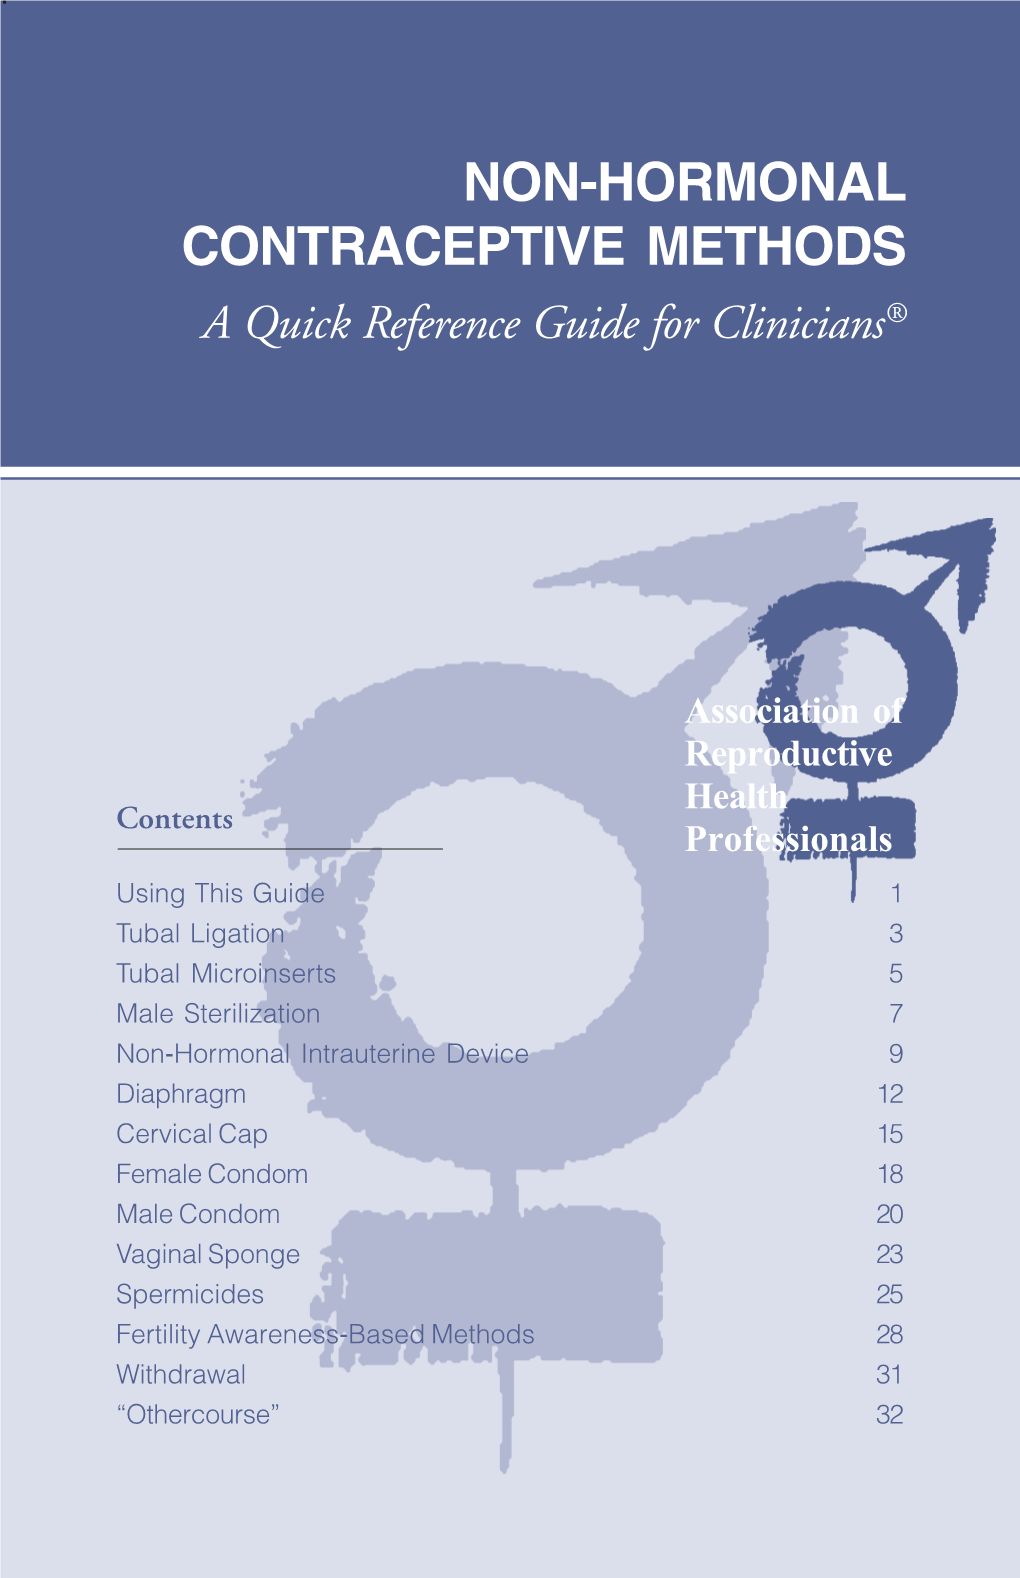 NON-HORMONAL CONTRACEPTIVE METHODS a Quick Reference Guide for Clinicians®